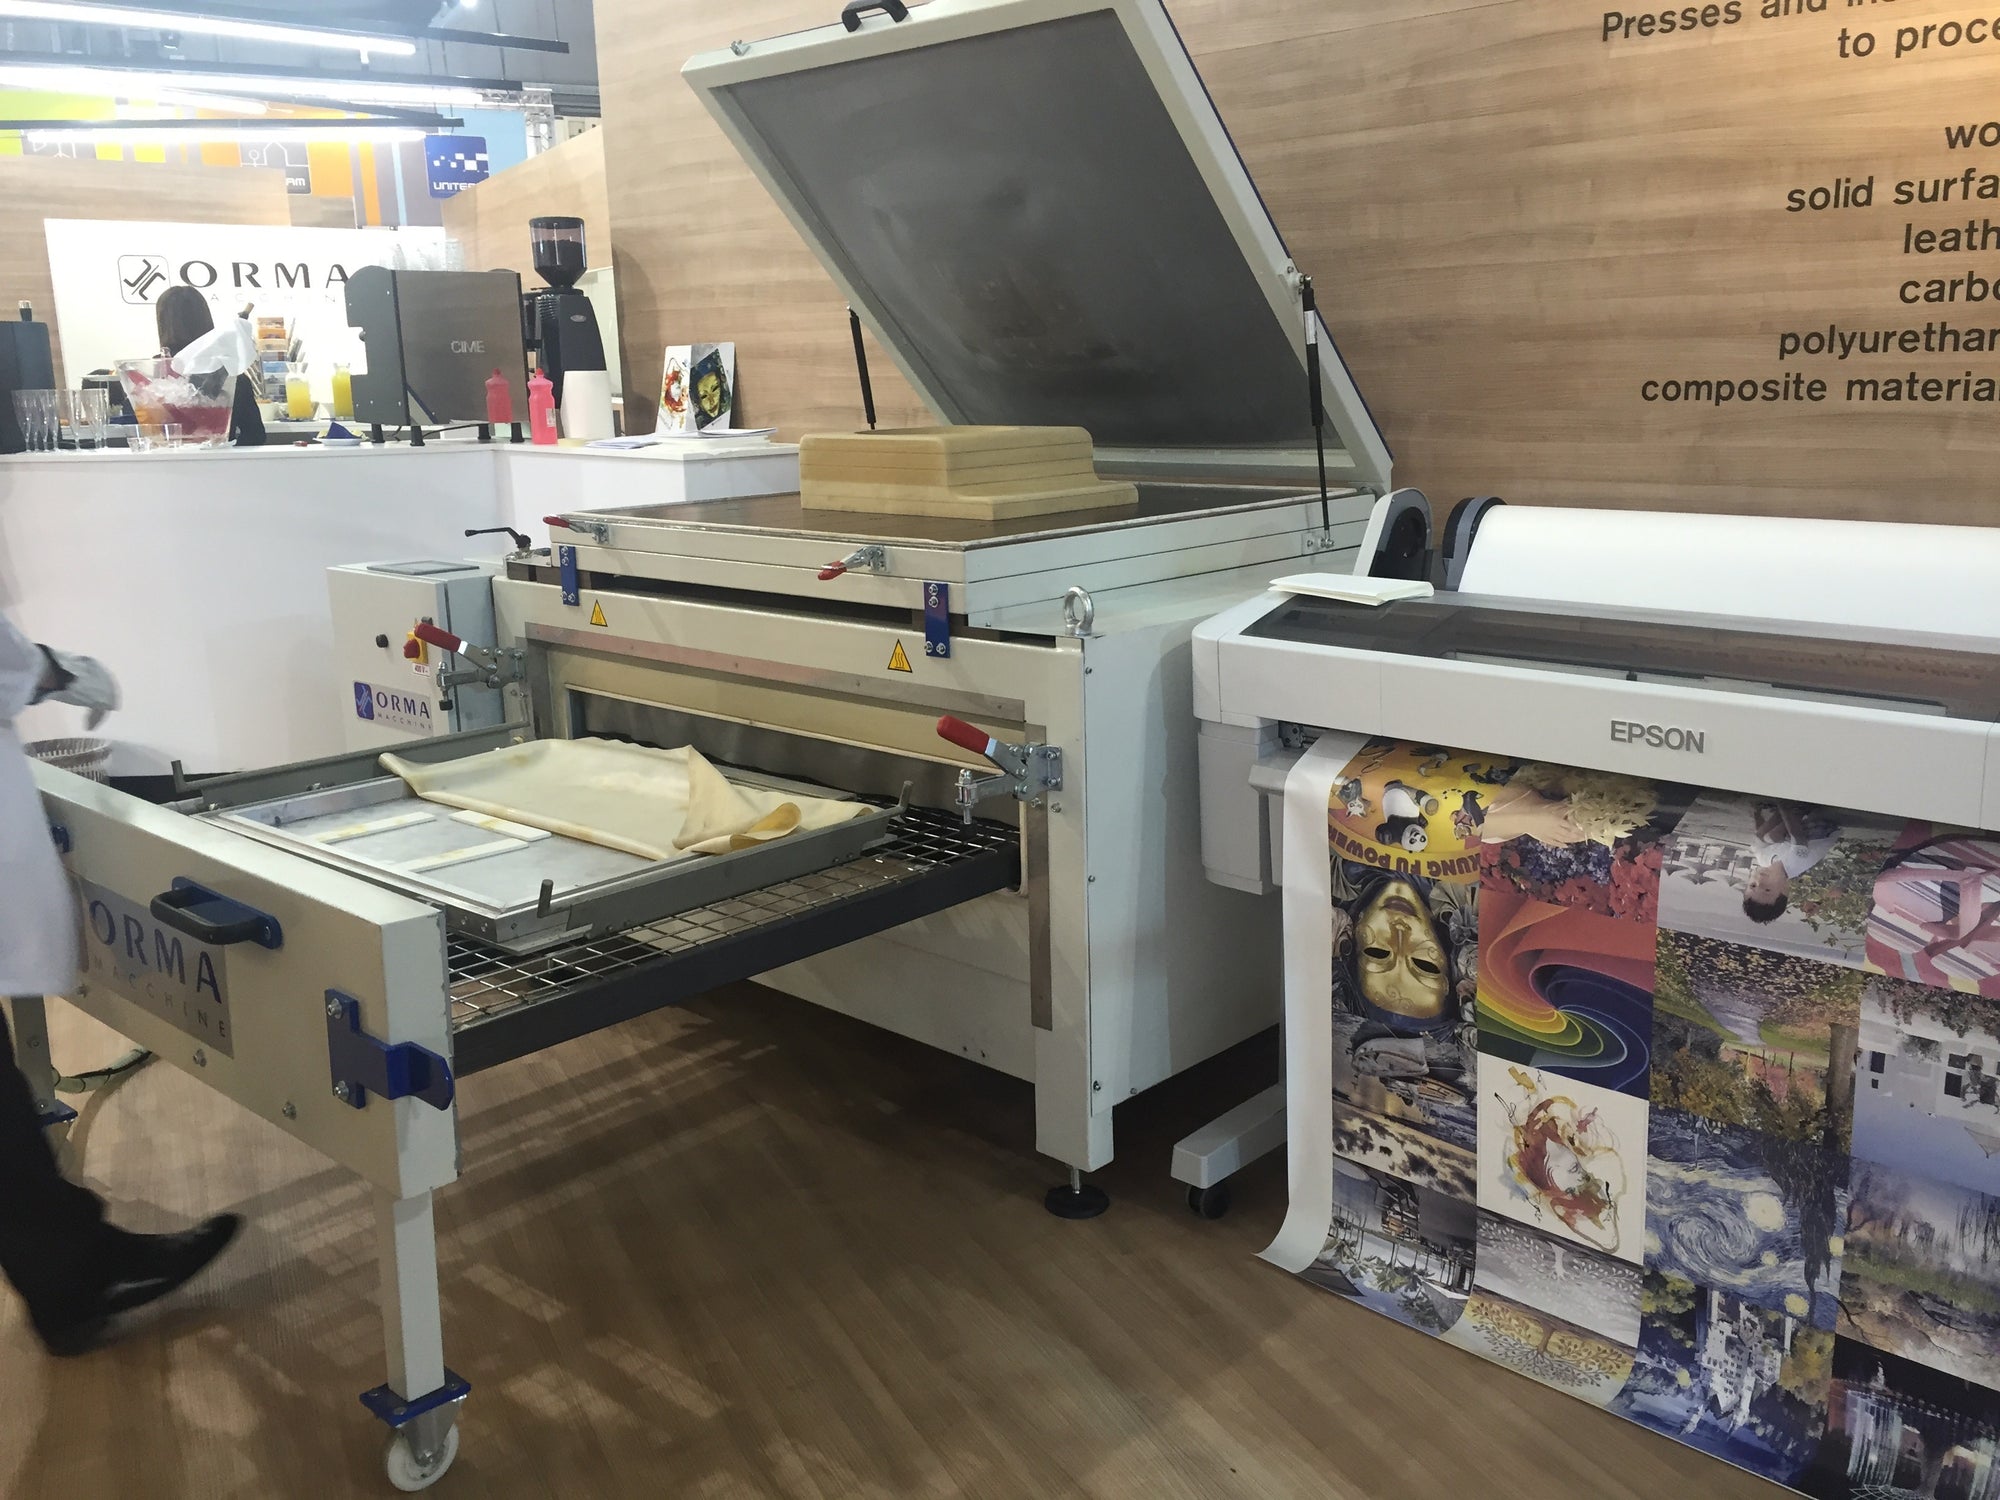 Orma Sublimation of Corian and Solid Surface